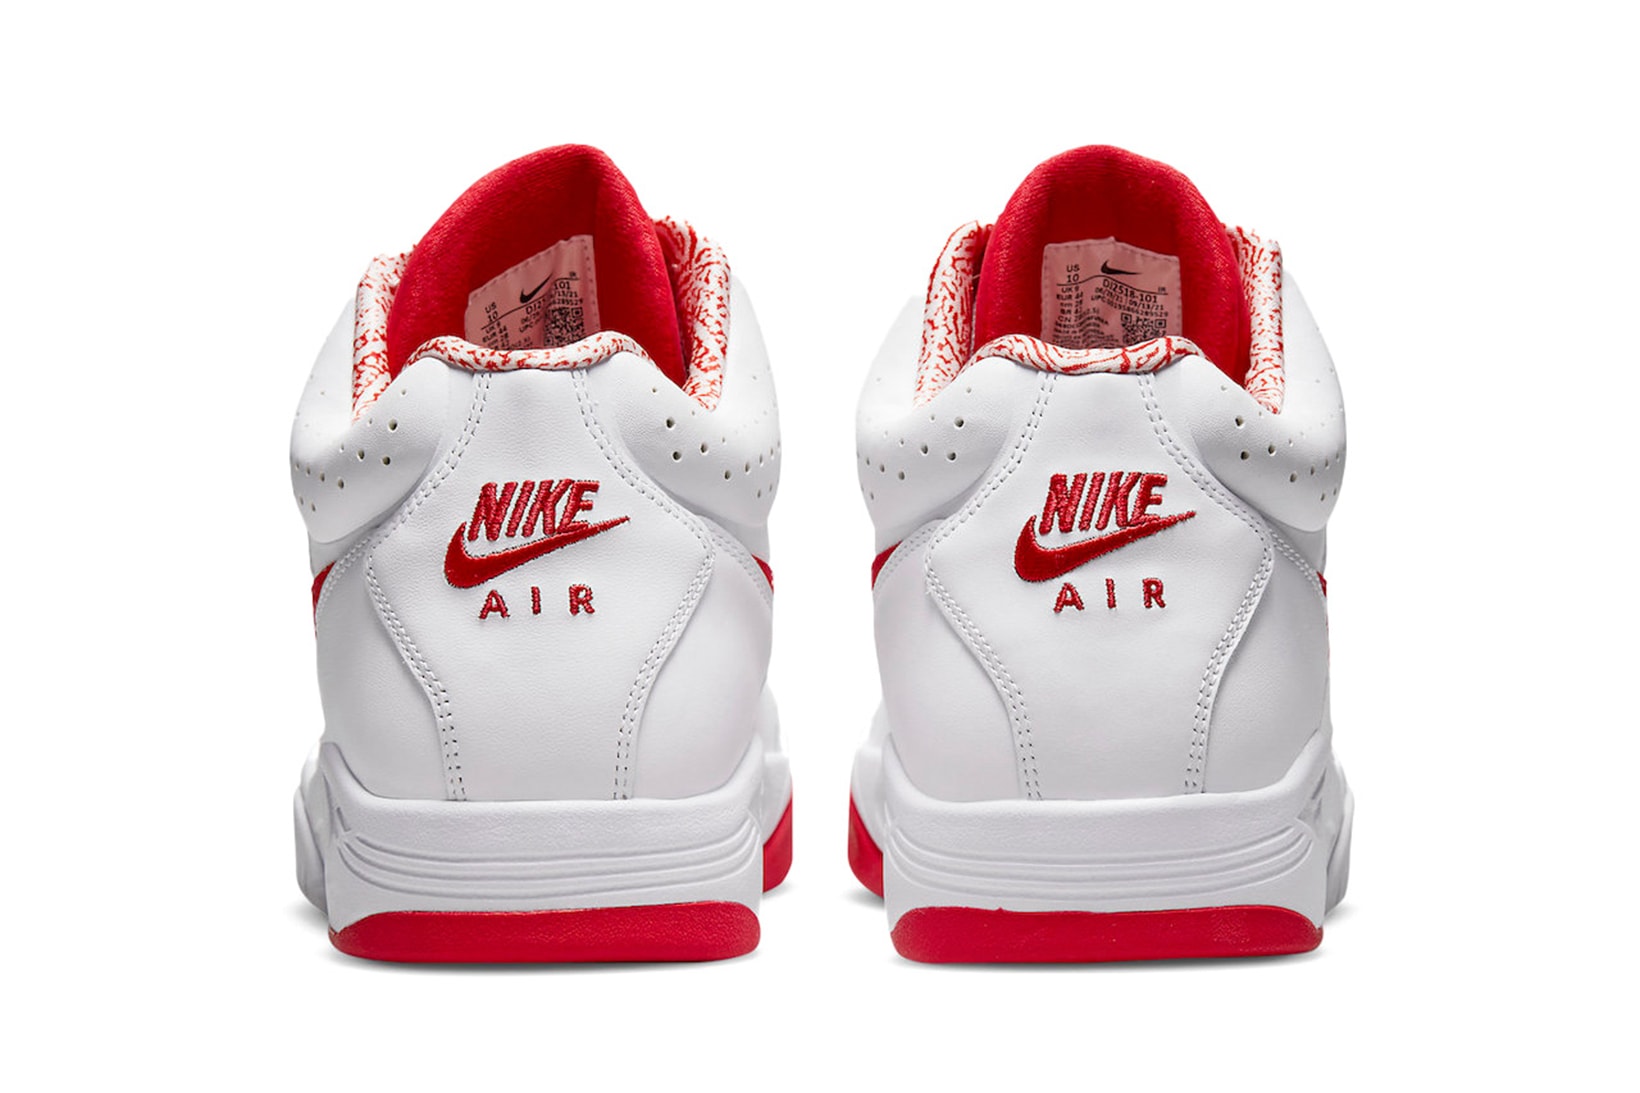 Nike Air Flight Lite Mid Scotty Pippen Sneakers Anniversary University Red Colorway Posterior View